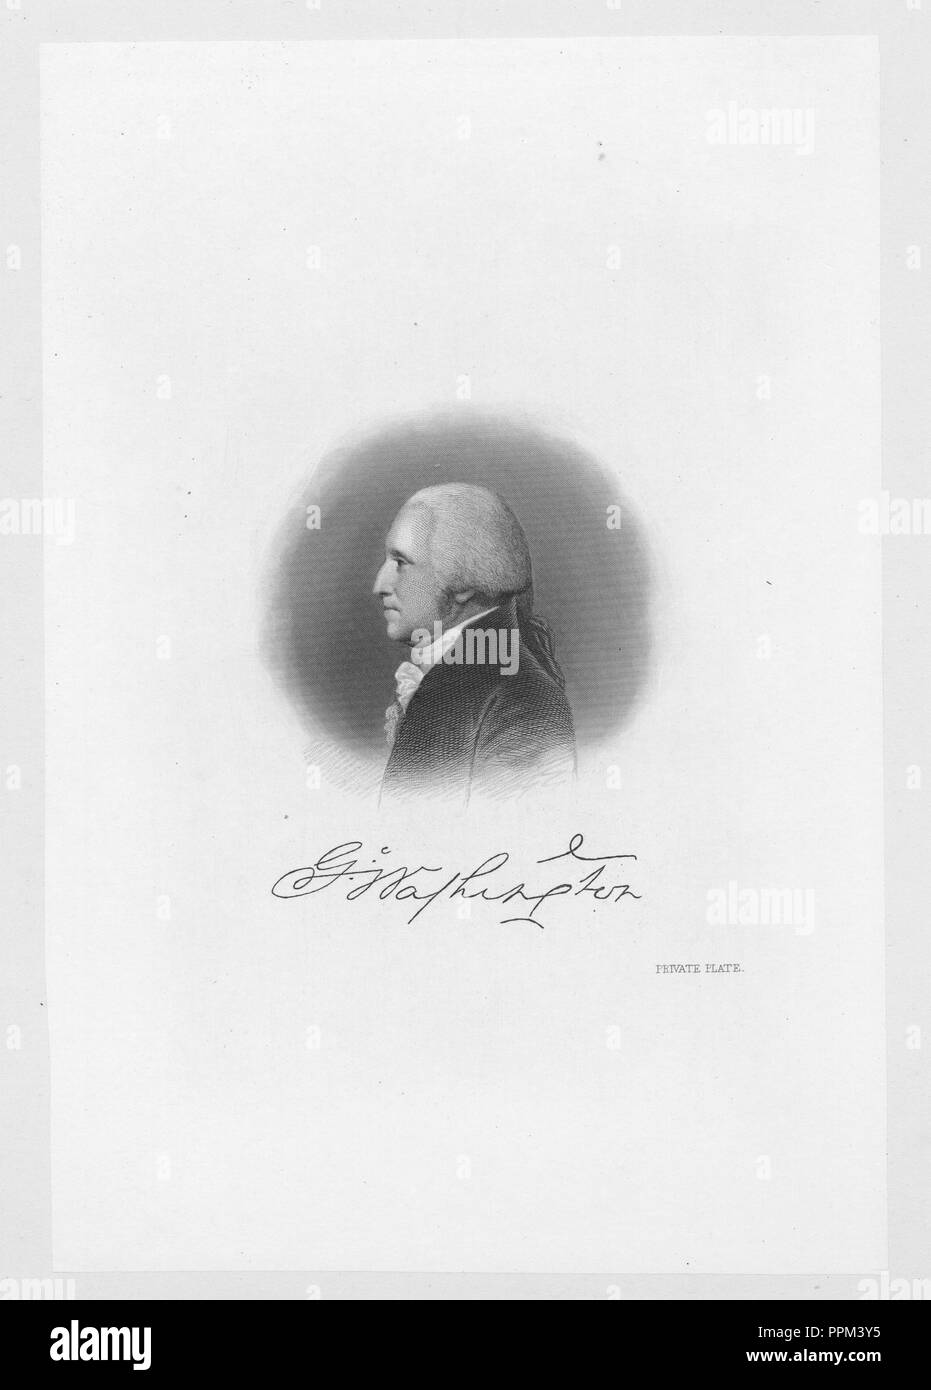 Engraved portrait of George Washington, Founding Father of the United States and the first President of the United States, an American politician from Wakefield, Westmoreland County, Virginia, 1837. From the New York Public Library. () Stock Photo